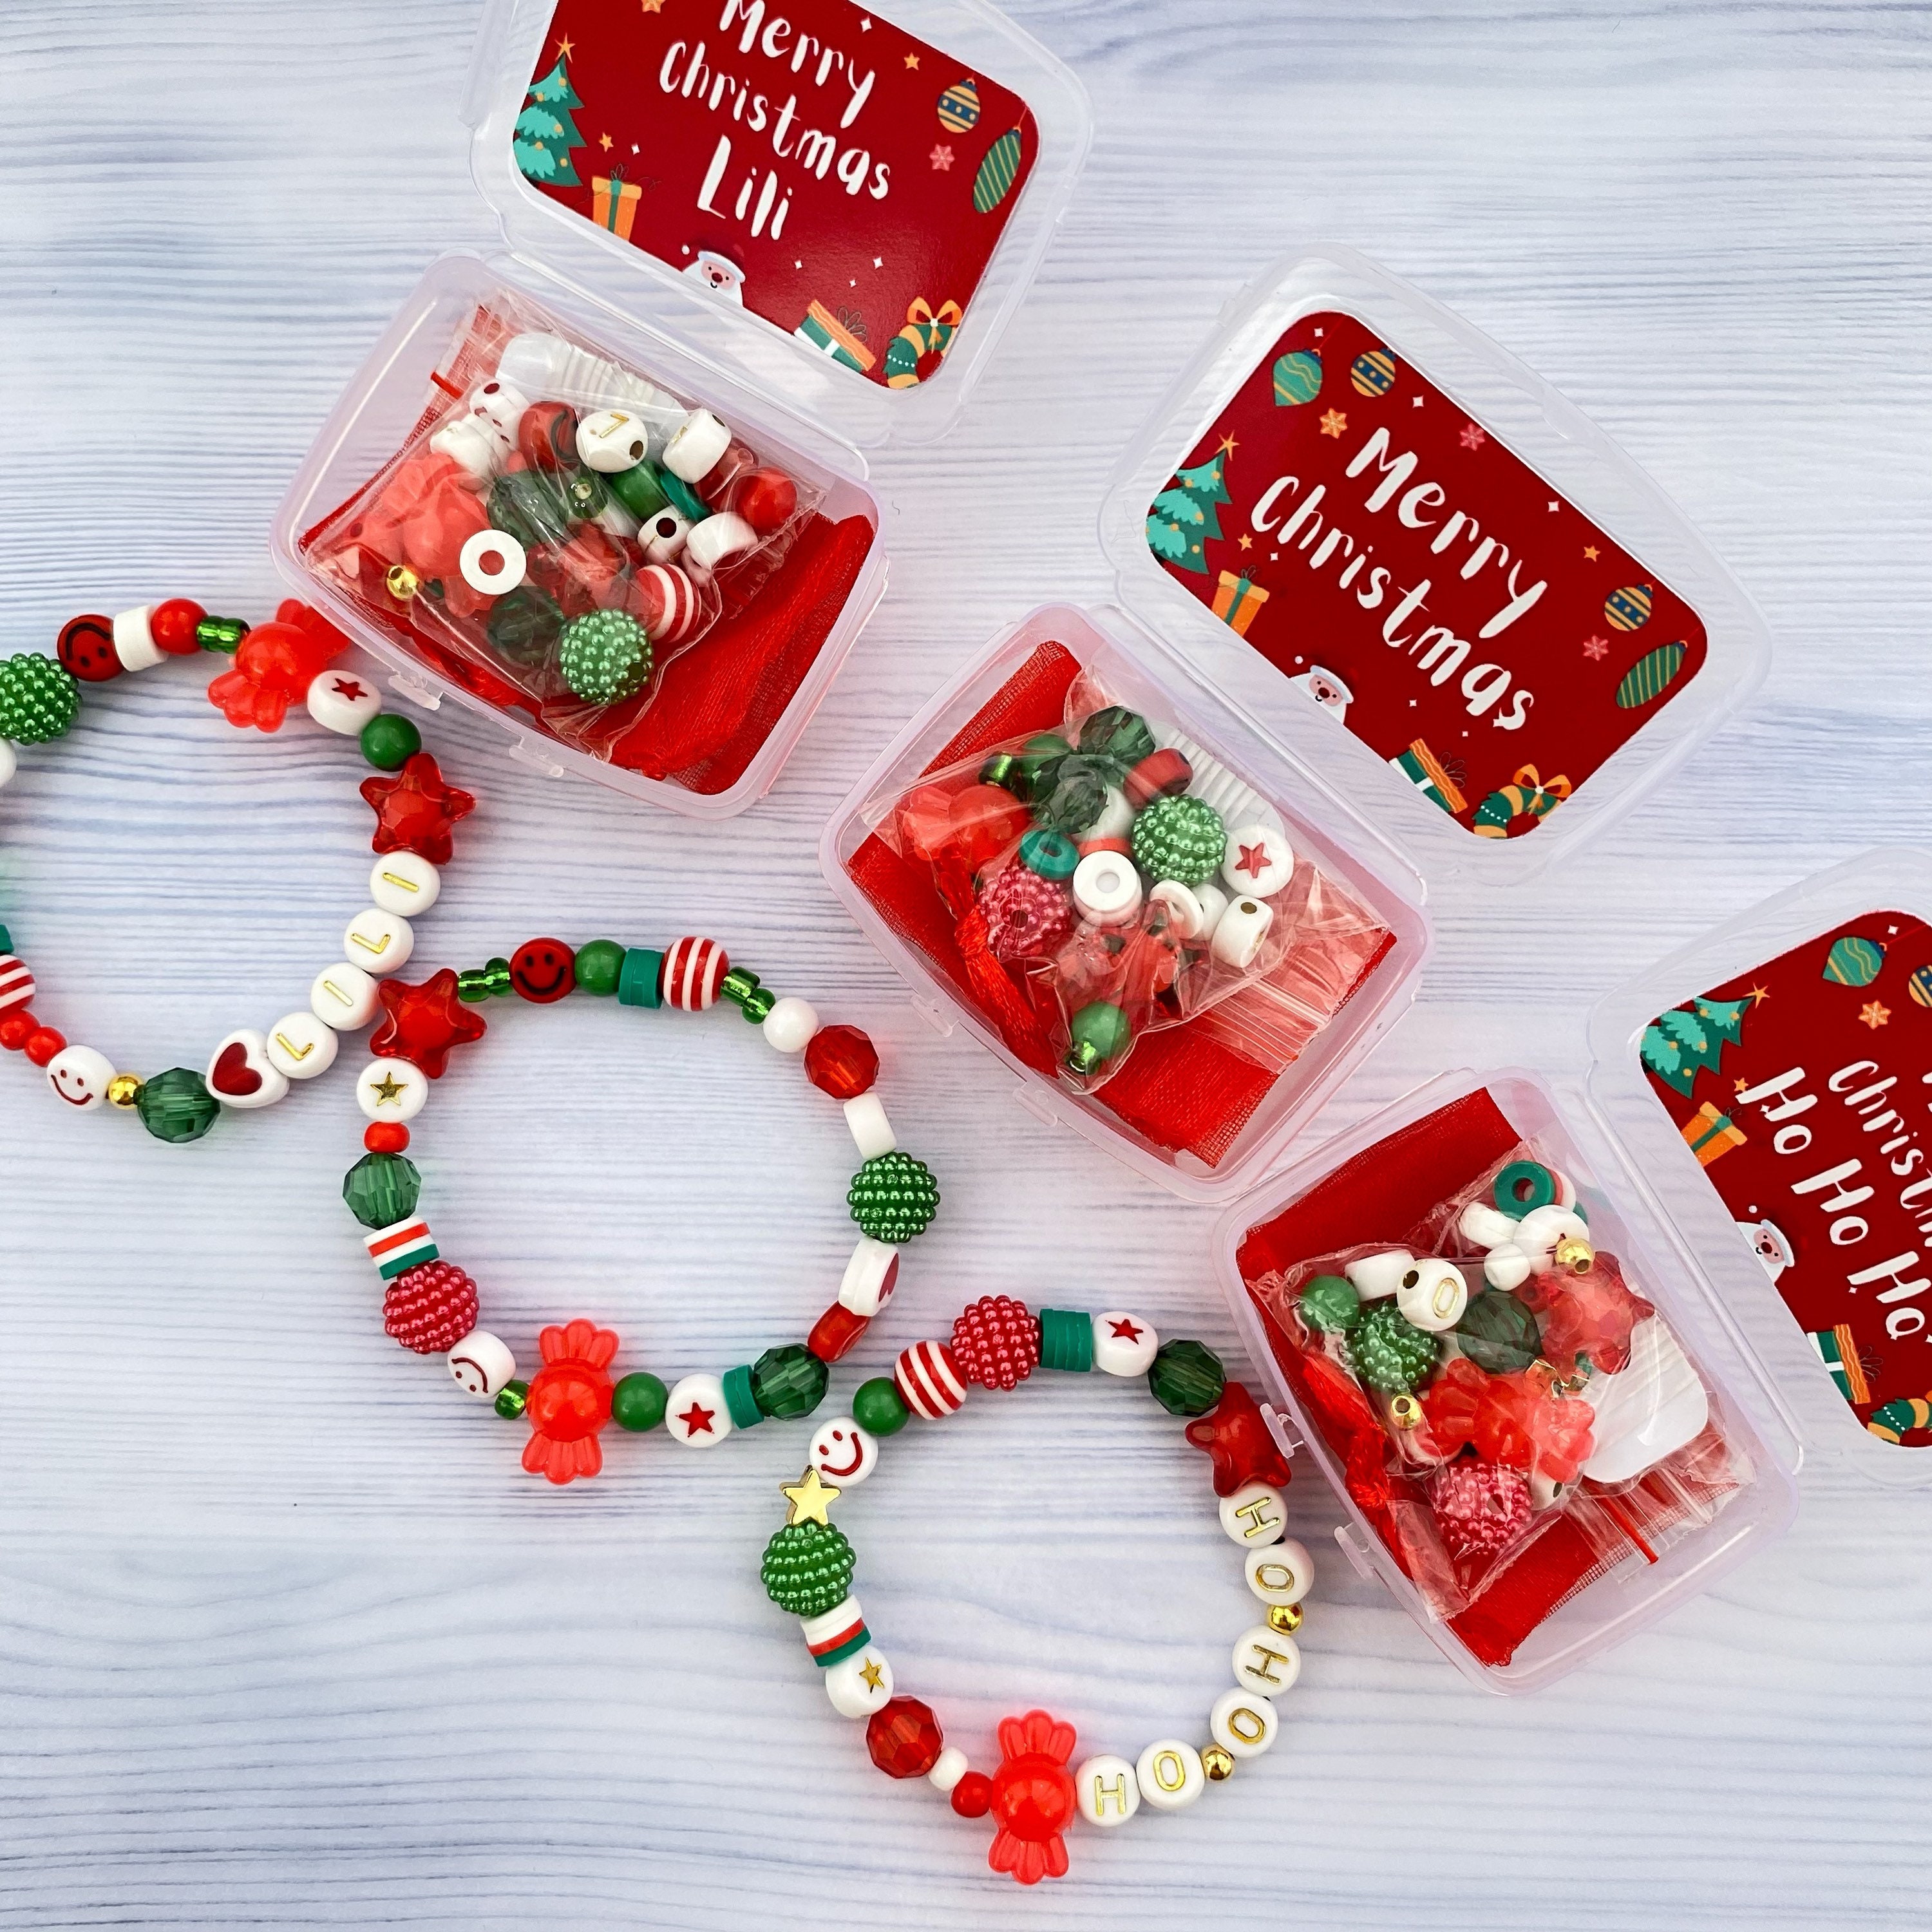 Charm Bracelet Making Kit,girls Diy Beaded Jewelry Making Kit,santa  Claus&snowman Christmas Theme Etc.,arts And Crafts Compatible With Kids  Ages 8-12